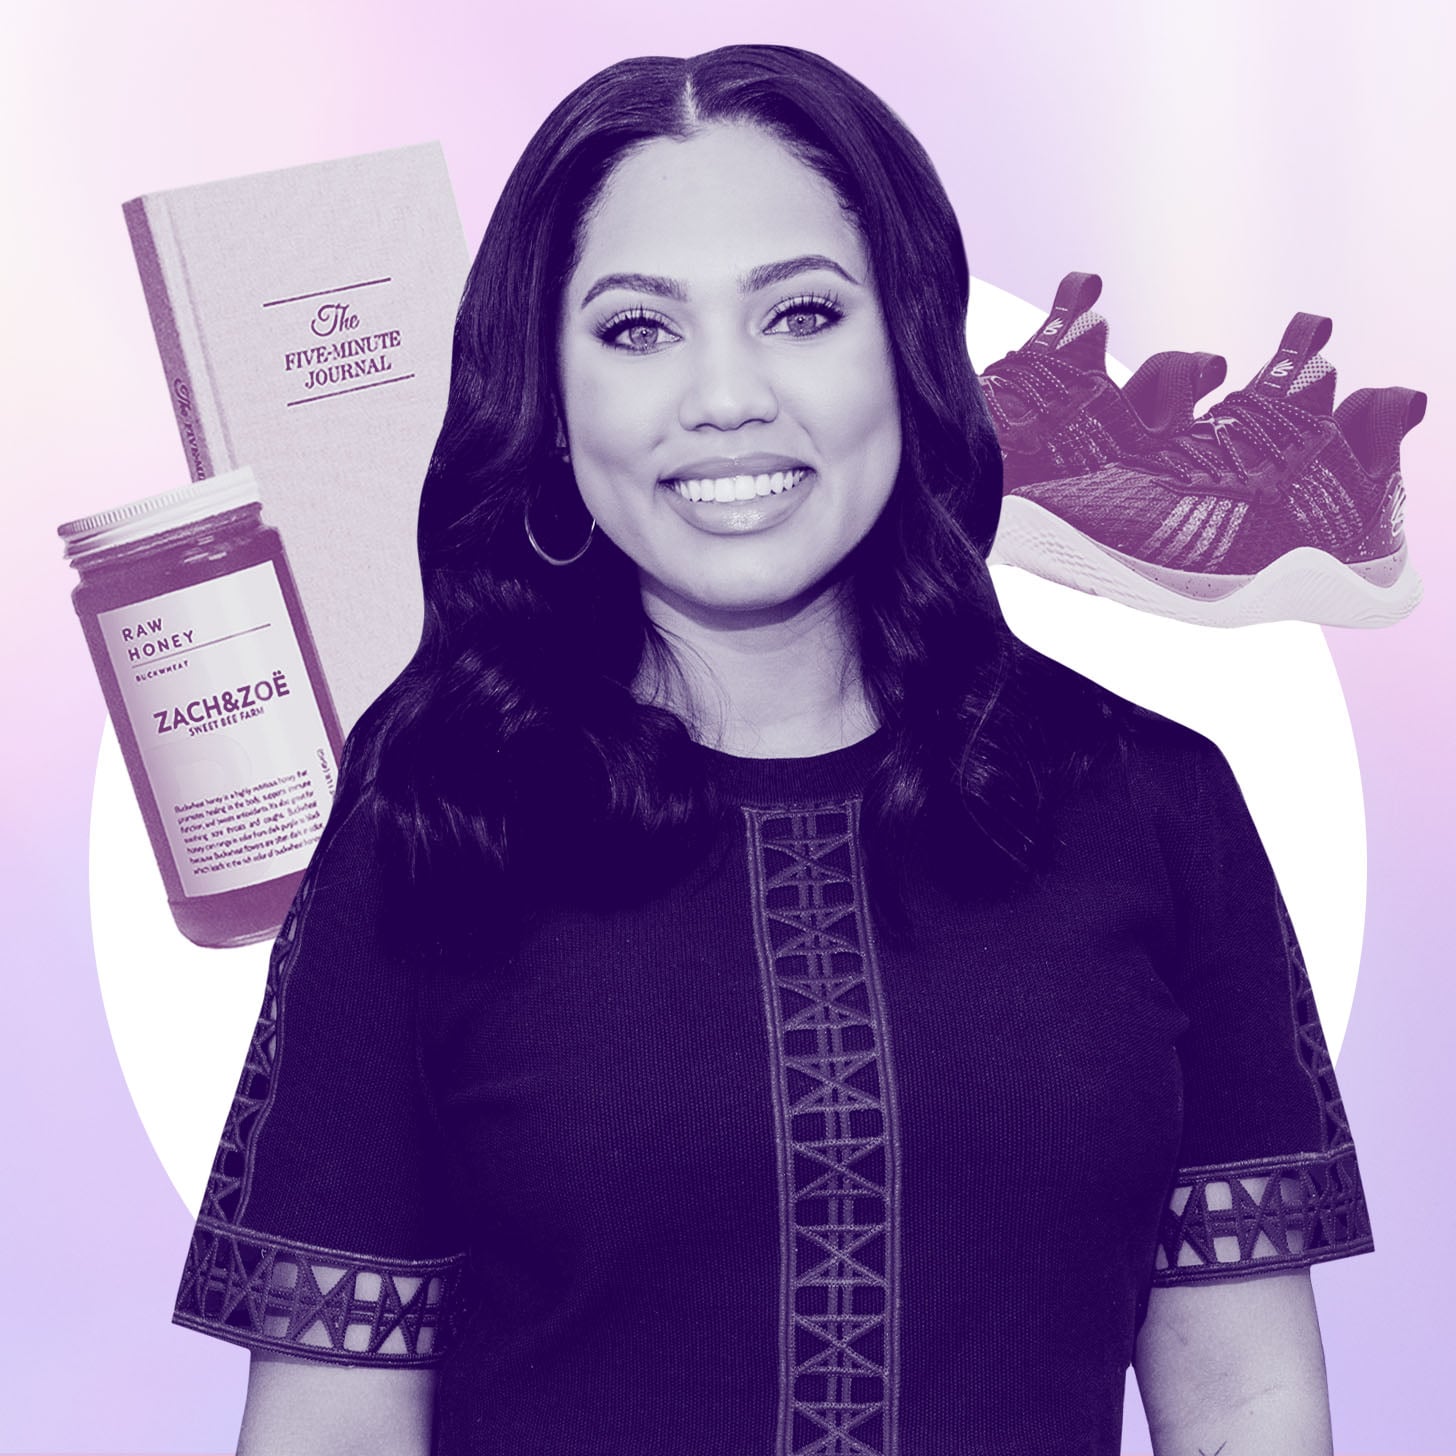 The Greatest Gifts with Ayesha Curry